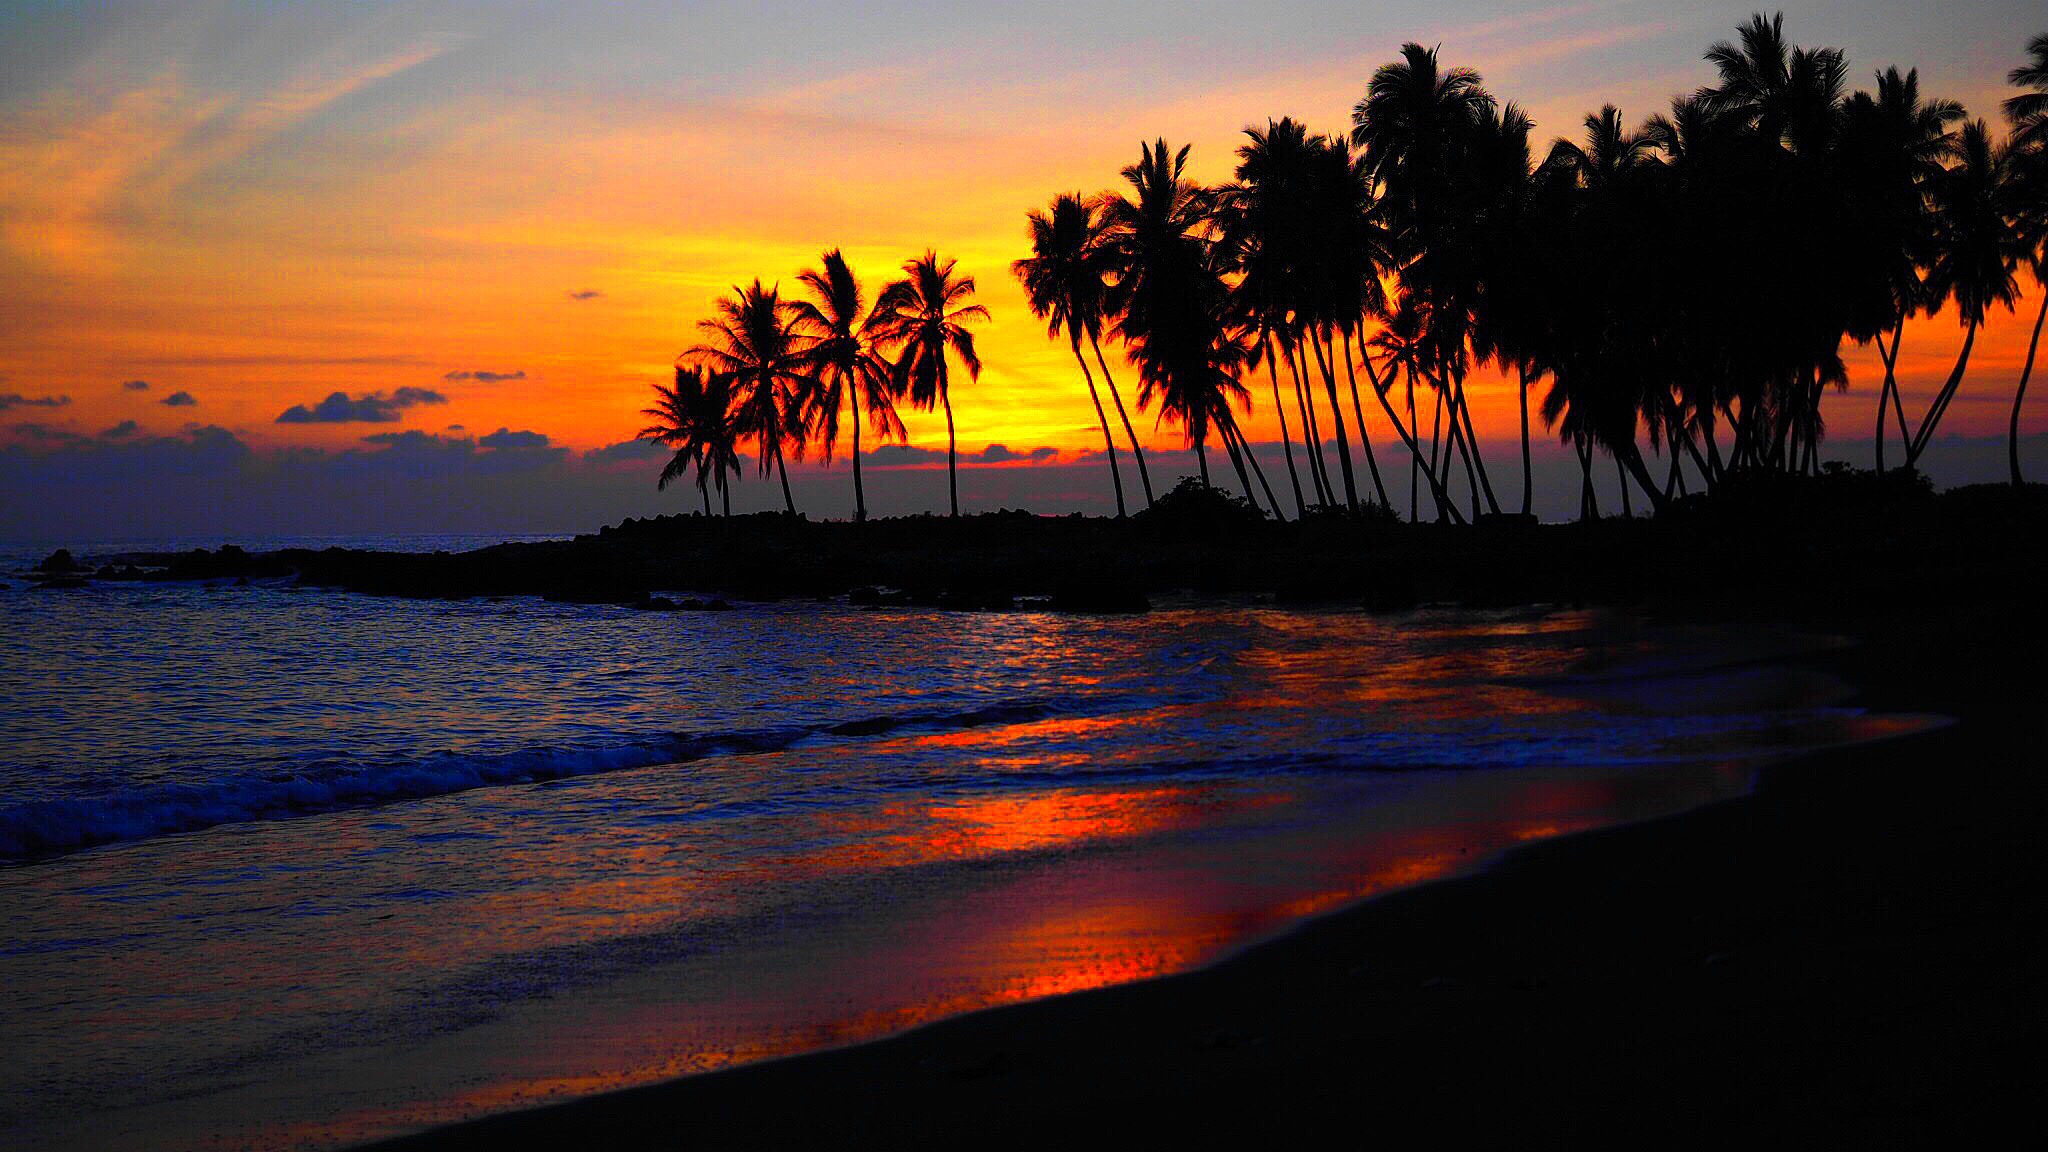 Beach Sunset With Palm Trees - HD Wallpaper 